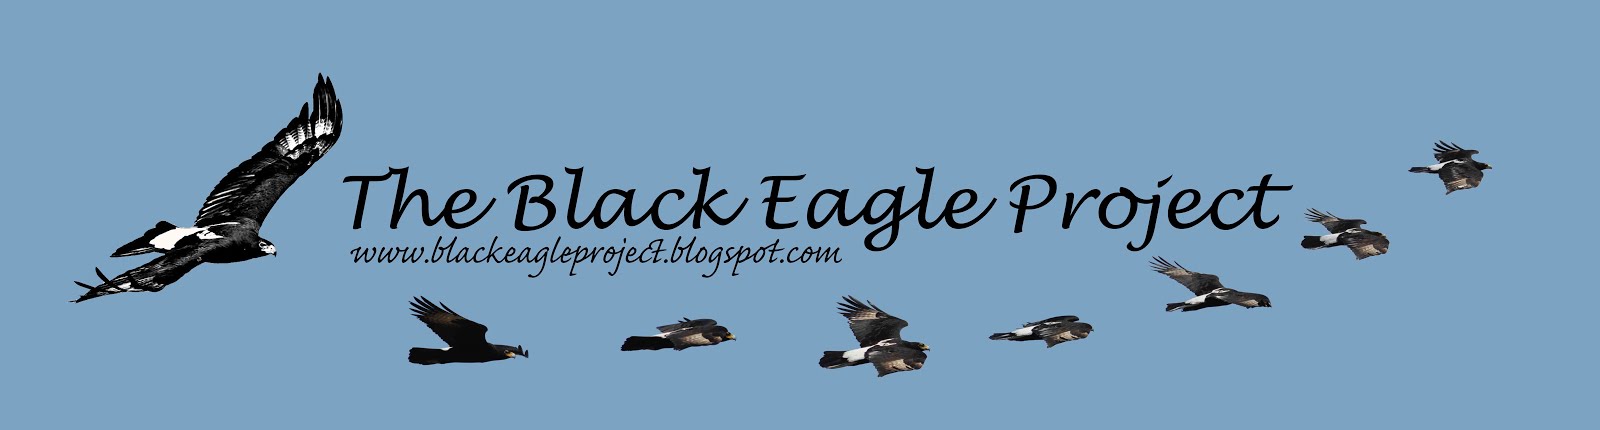 The Black Eagle Project